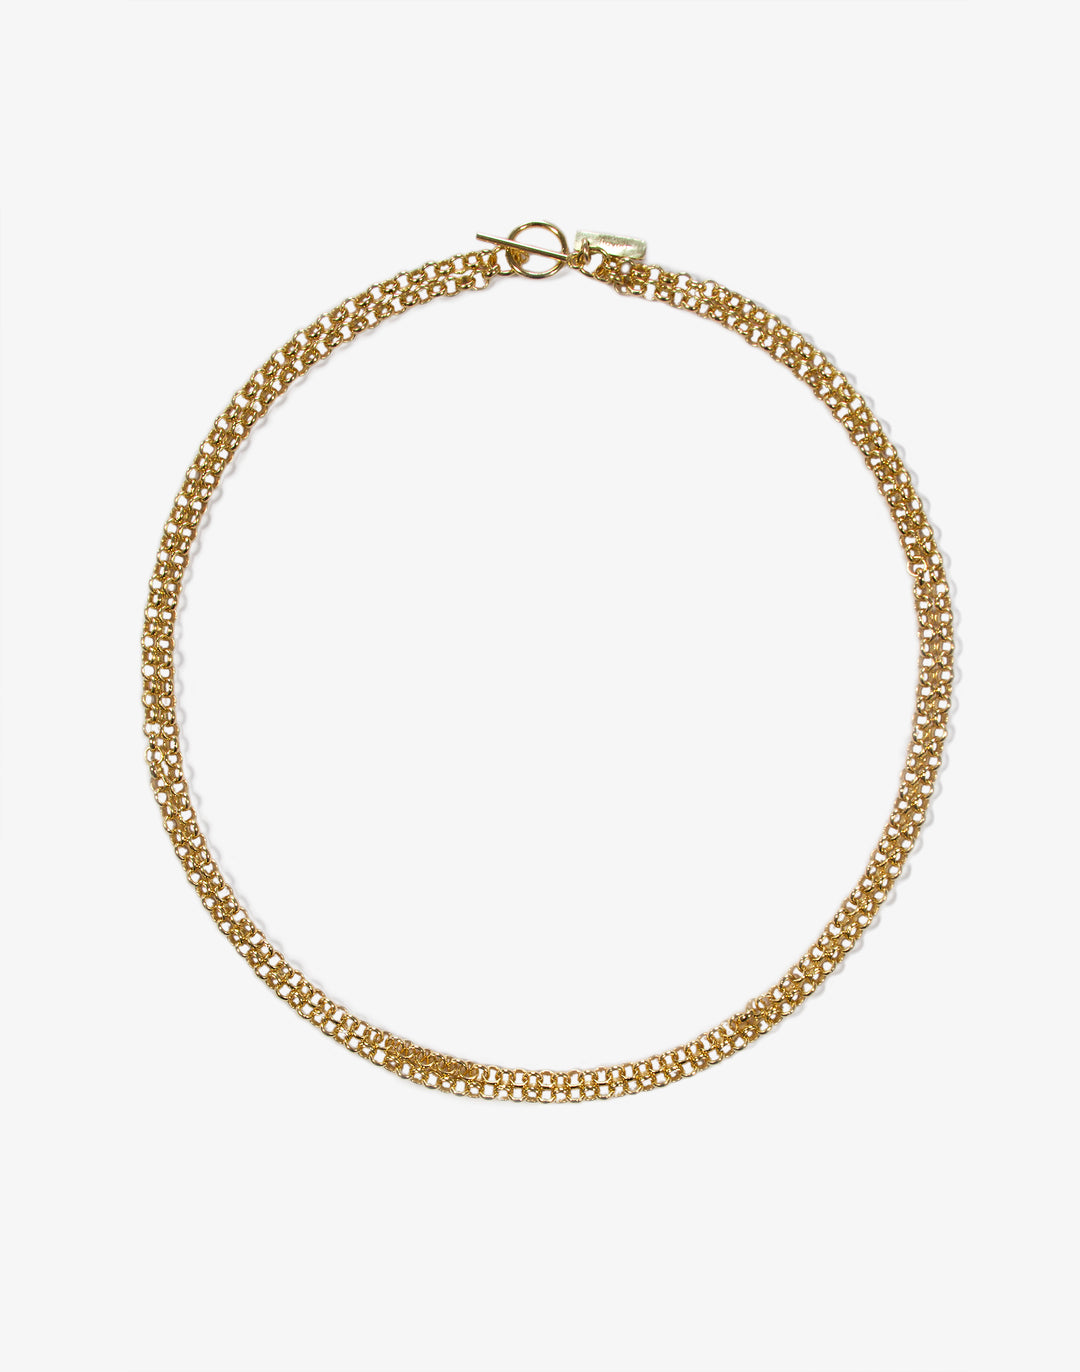 Refined Women jewelry unisex gold double chain chic cnecklace - Made In Brookyn New York